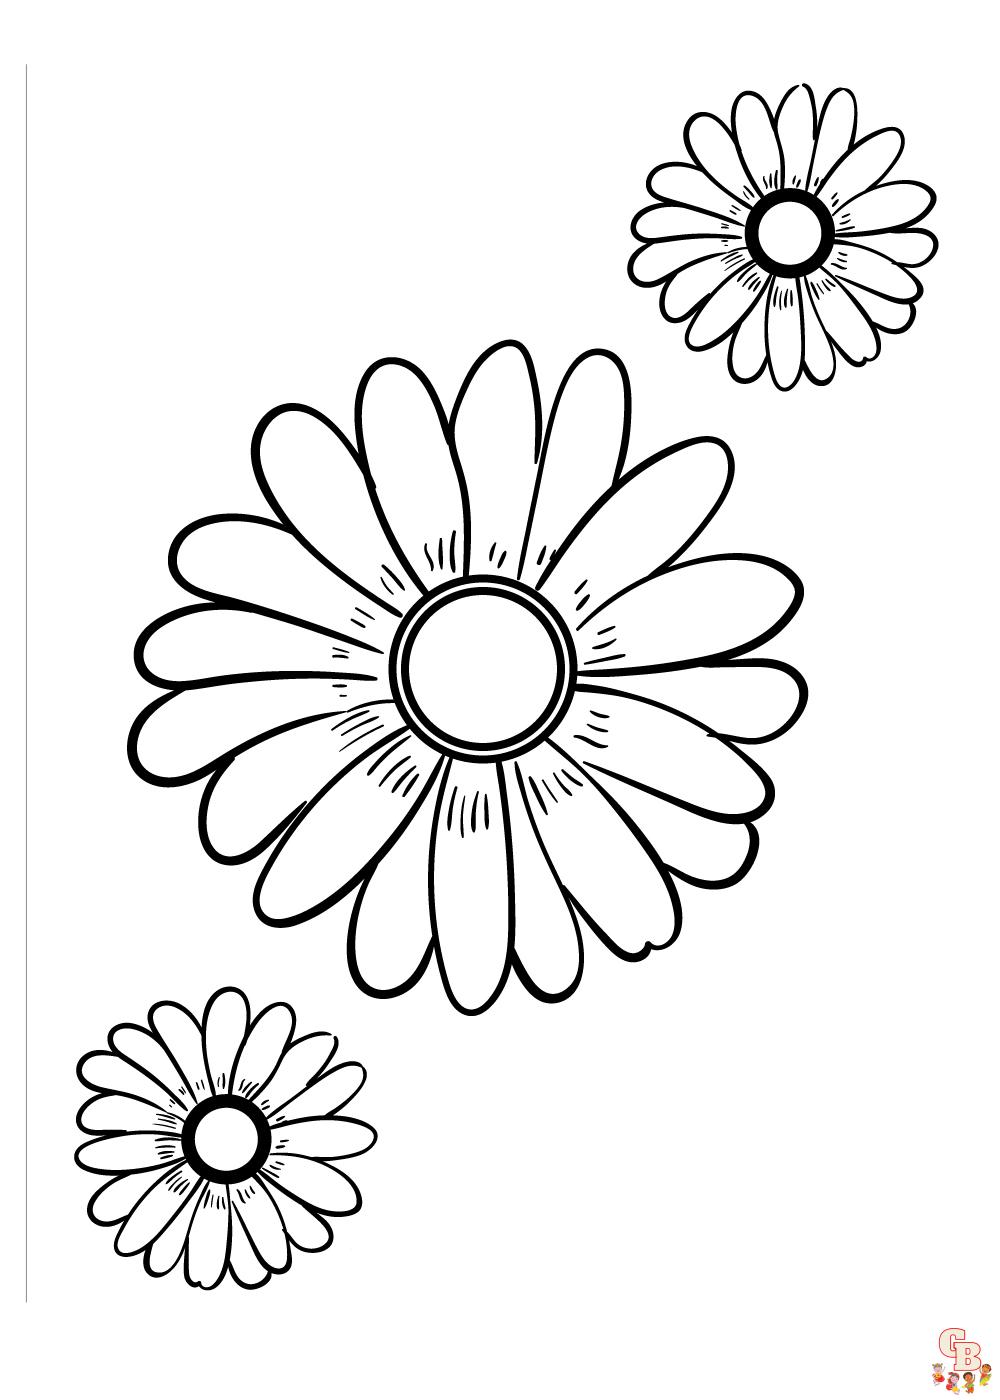 Daisy Coloring Pages 13